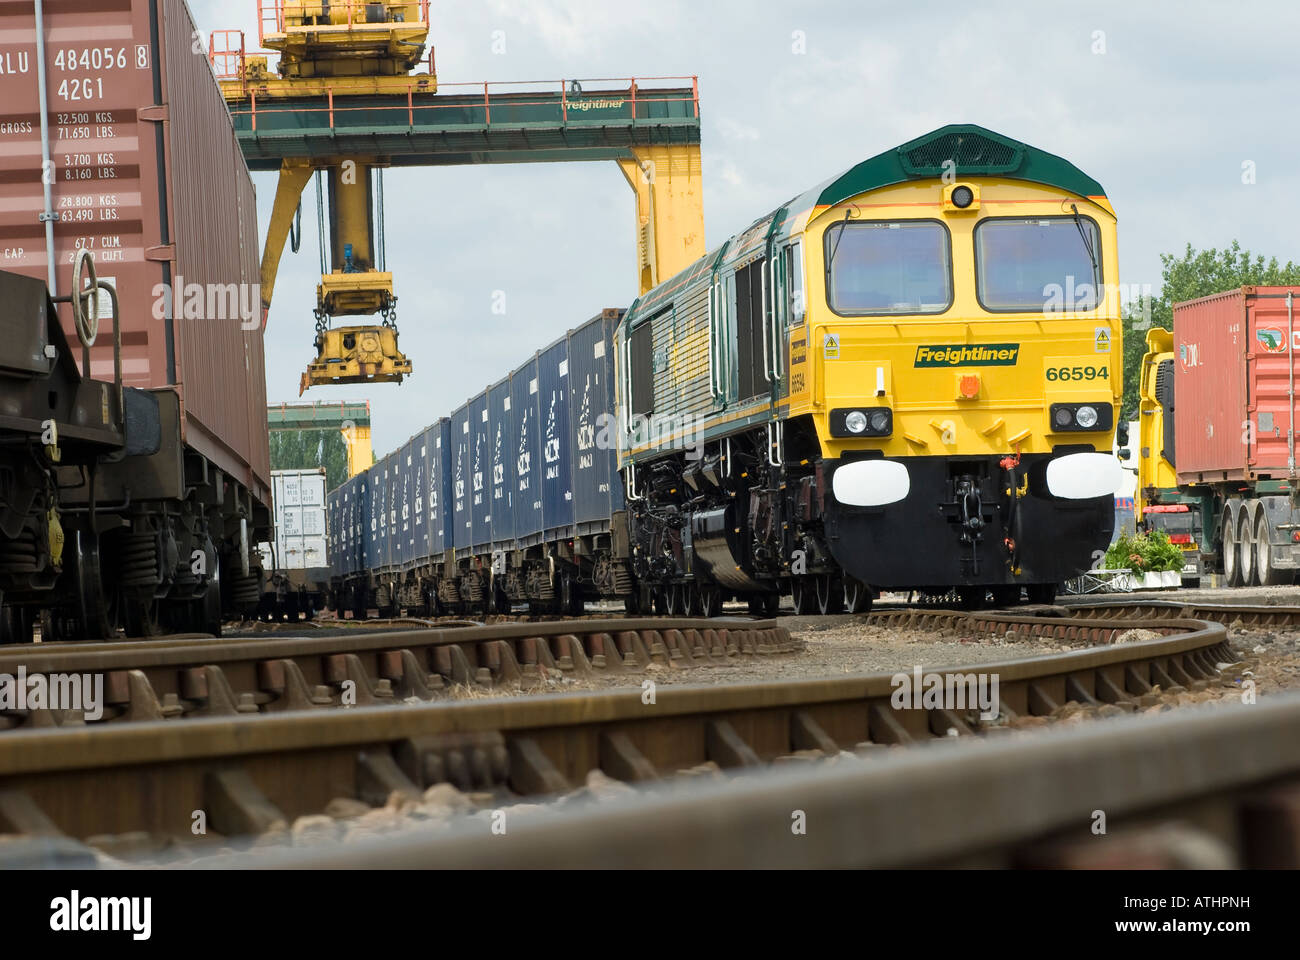 freightliner class 66 locomotive hauling containers at the southampton rail freight terminal Stock Photo